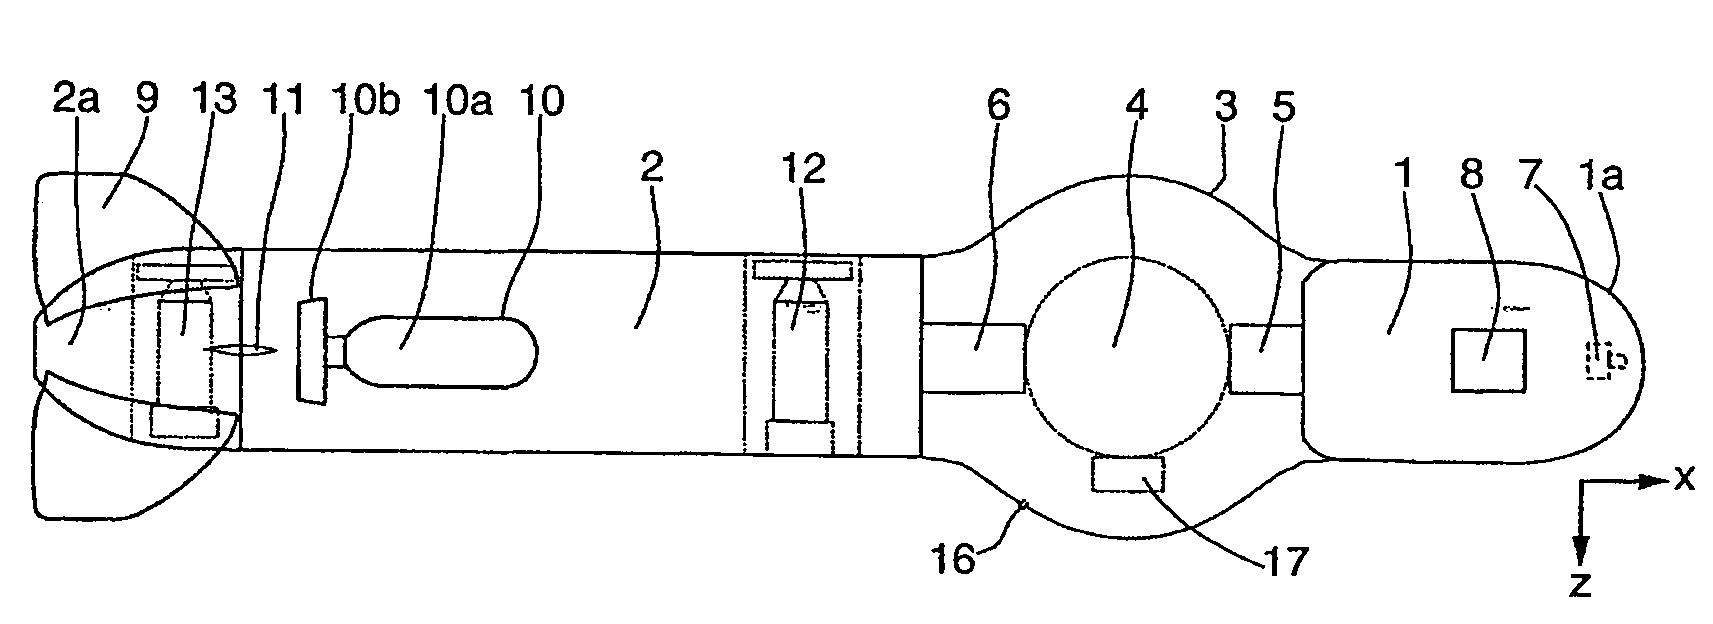 Device for destroying subsea or floating objects